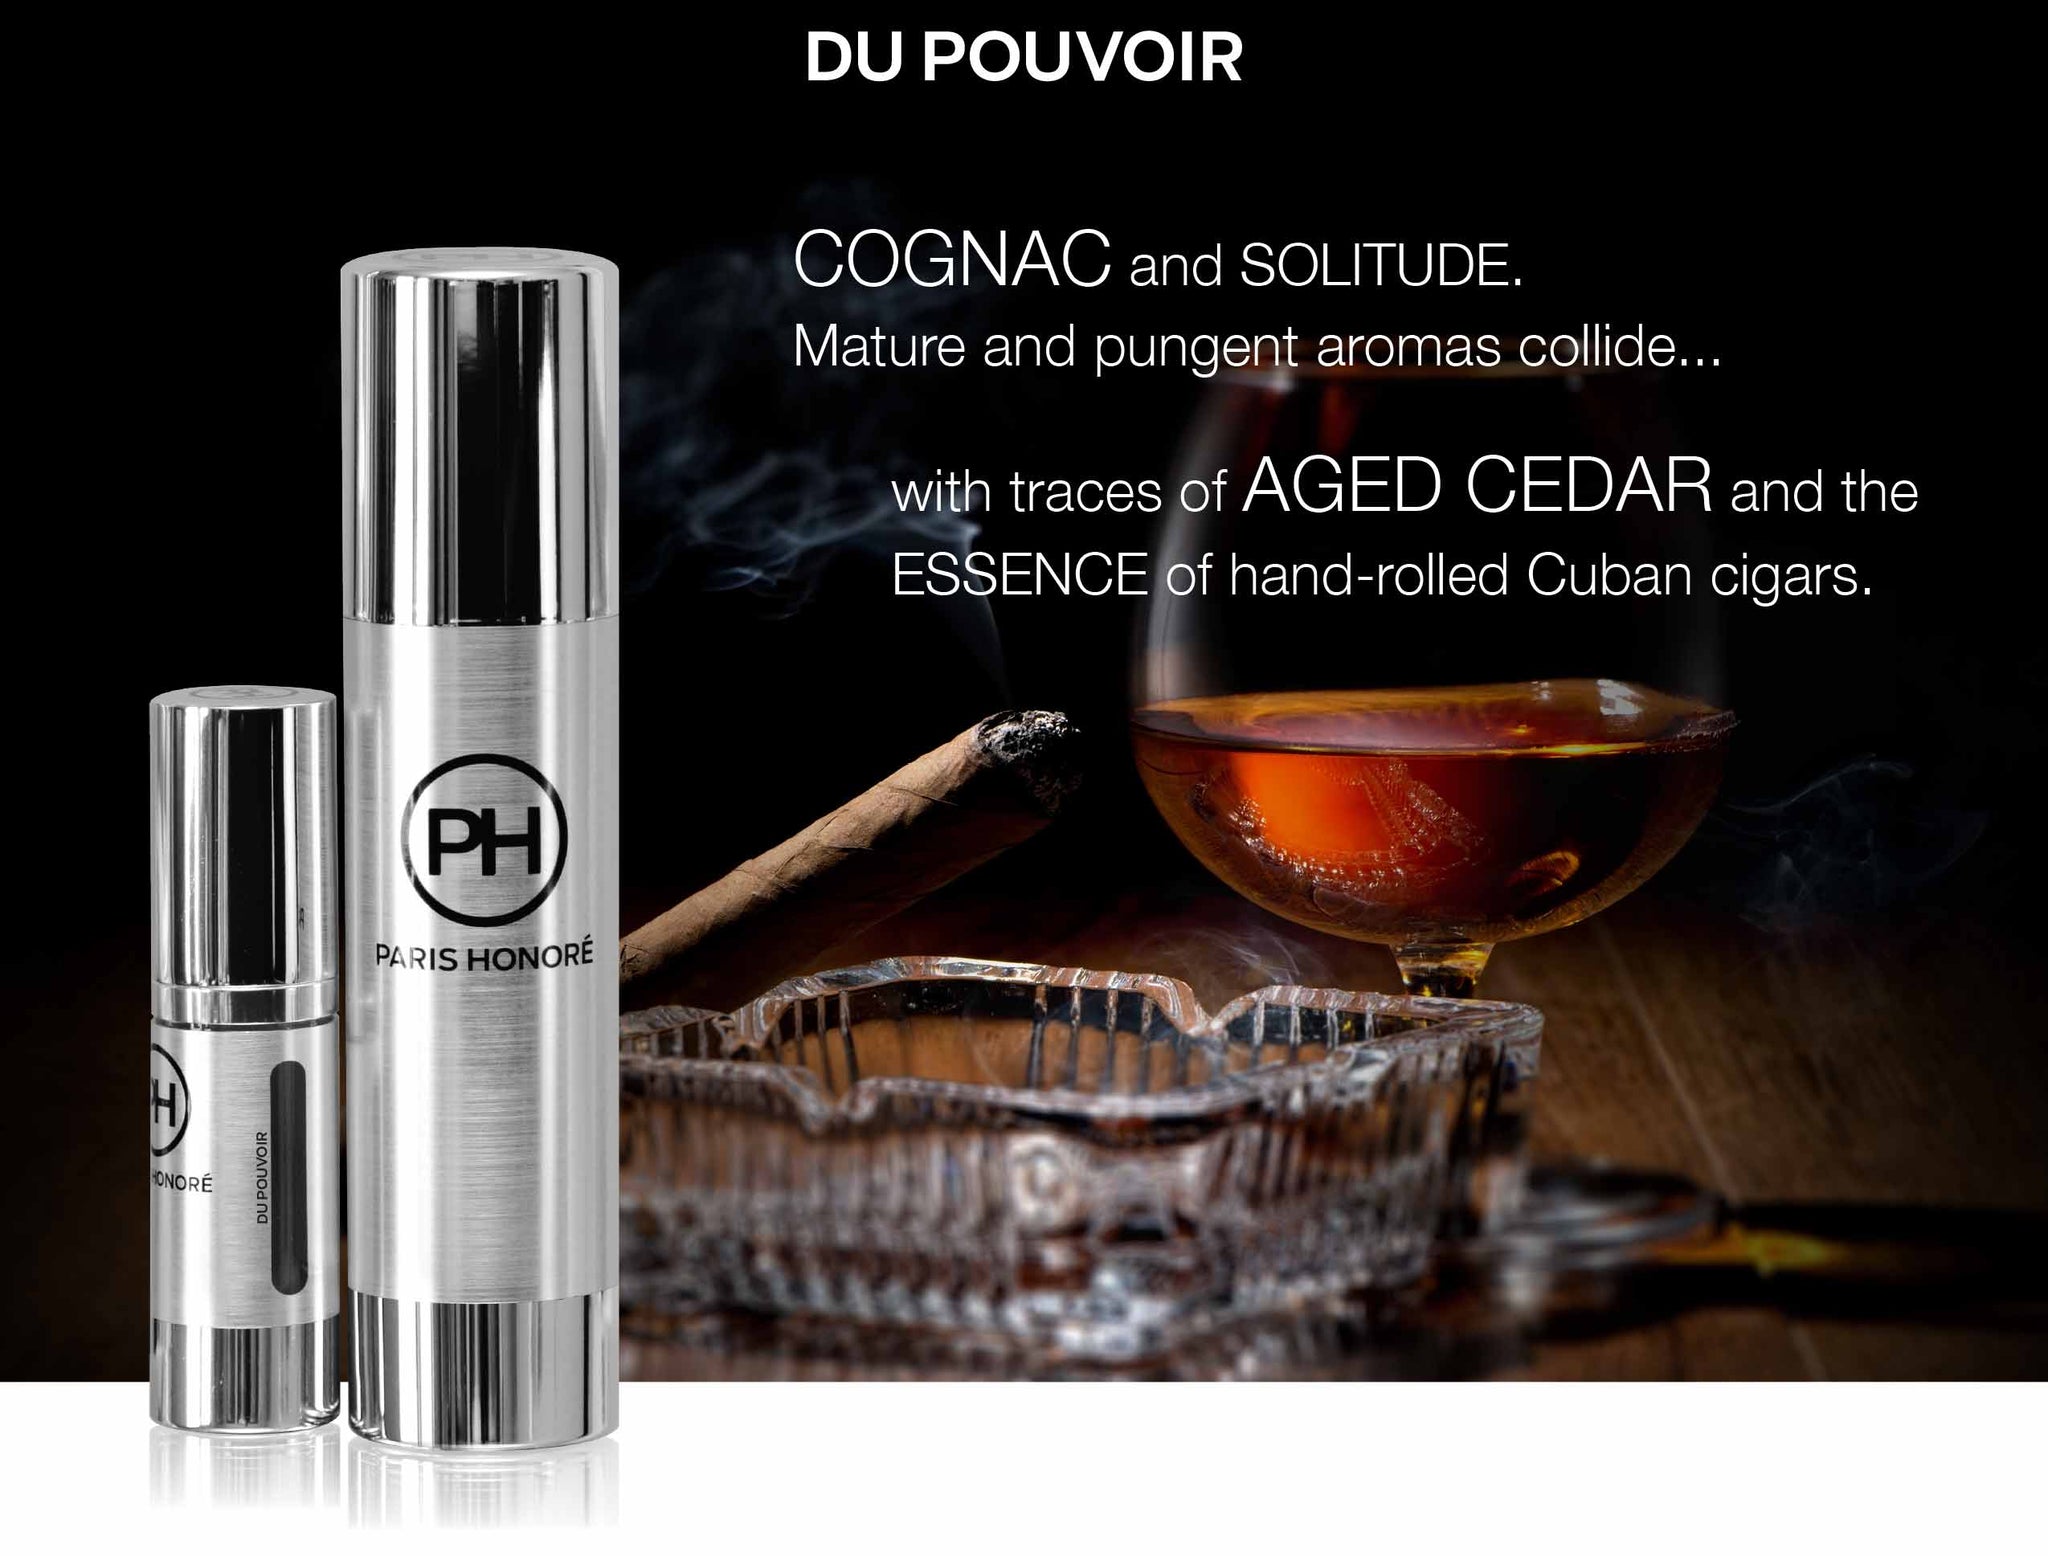 DU POUVOIR.  Cognac and solitude. Mature and pungent aromas collide with traces of aged cedar and the essence of hand-rolled Cuban cigars - PARIS HONORÉ luxury organic skincare